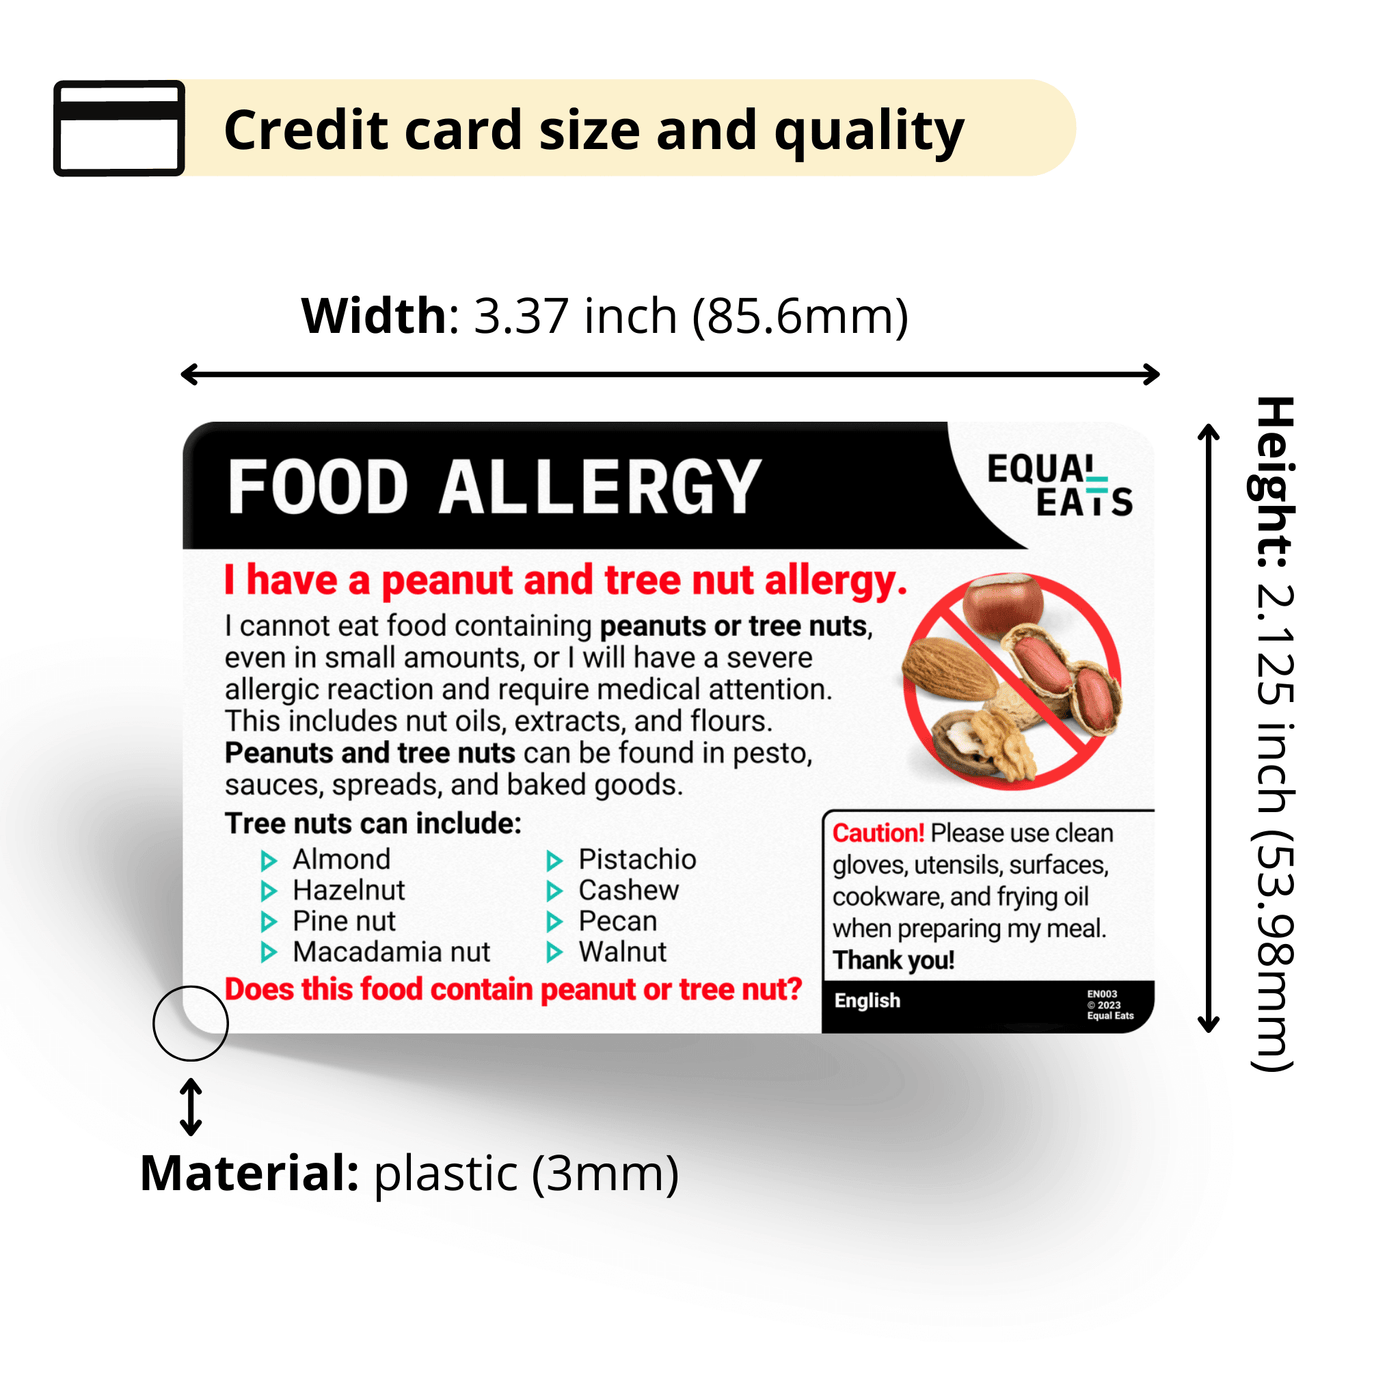 Equal Eats Allergy Translation Card for Peanut and Nuts